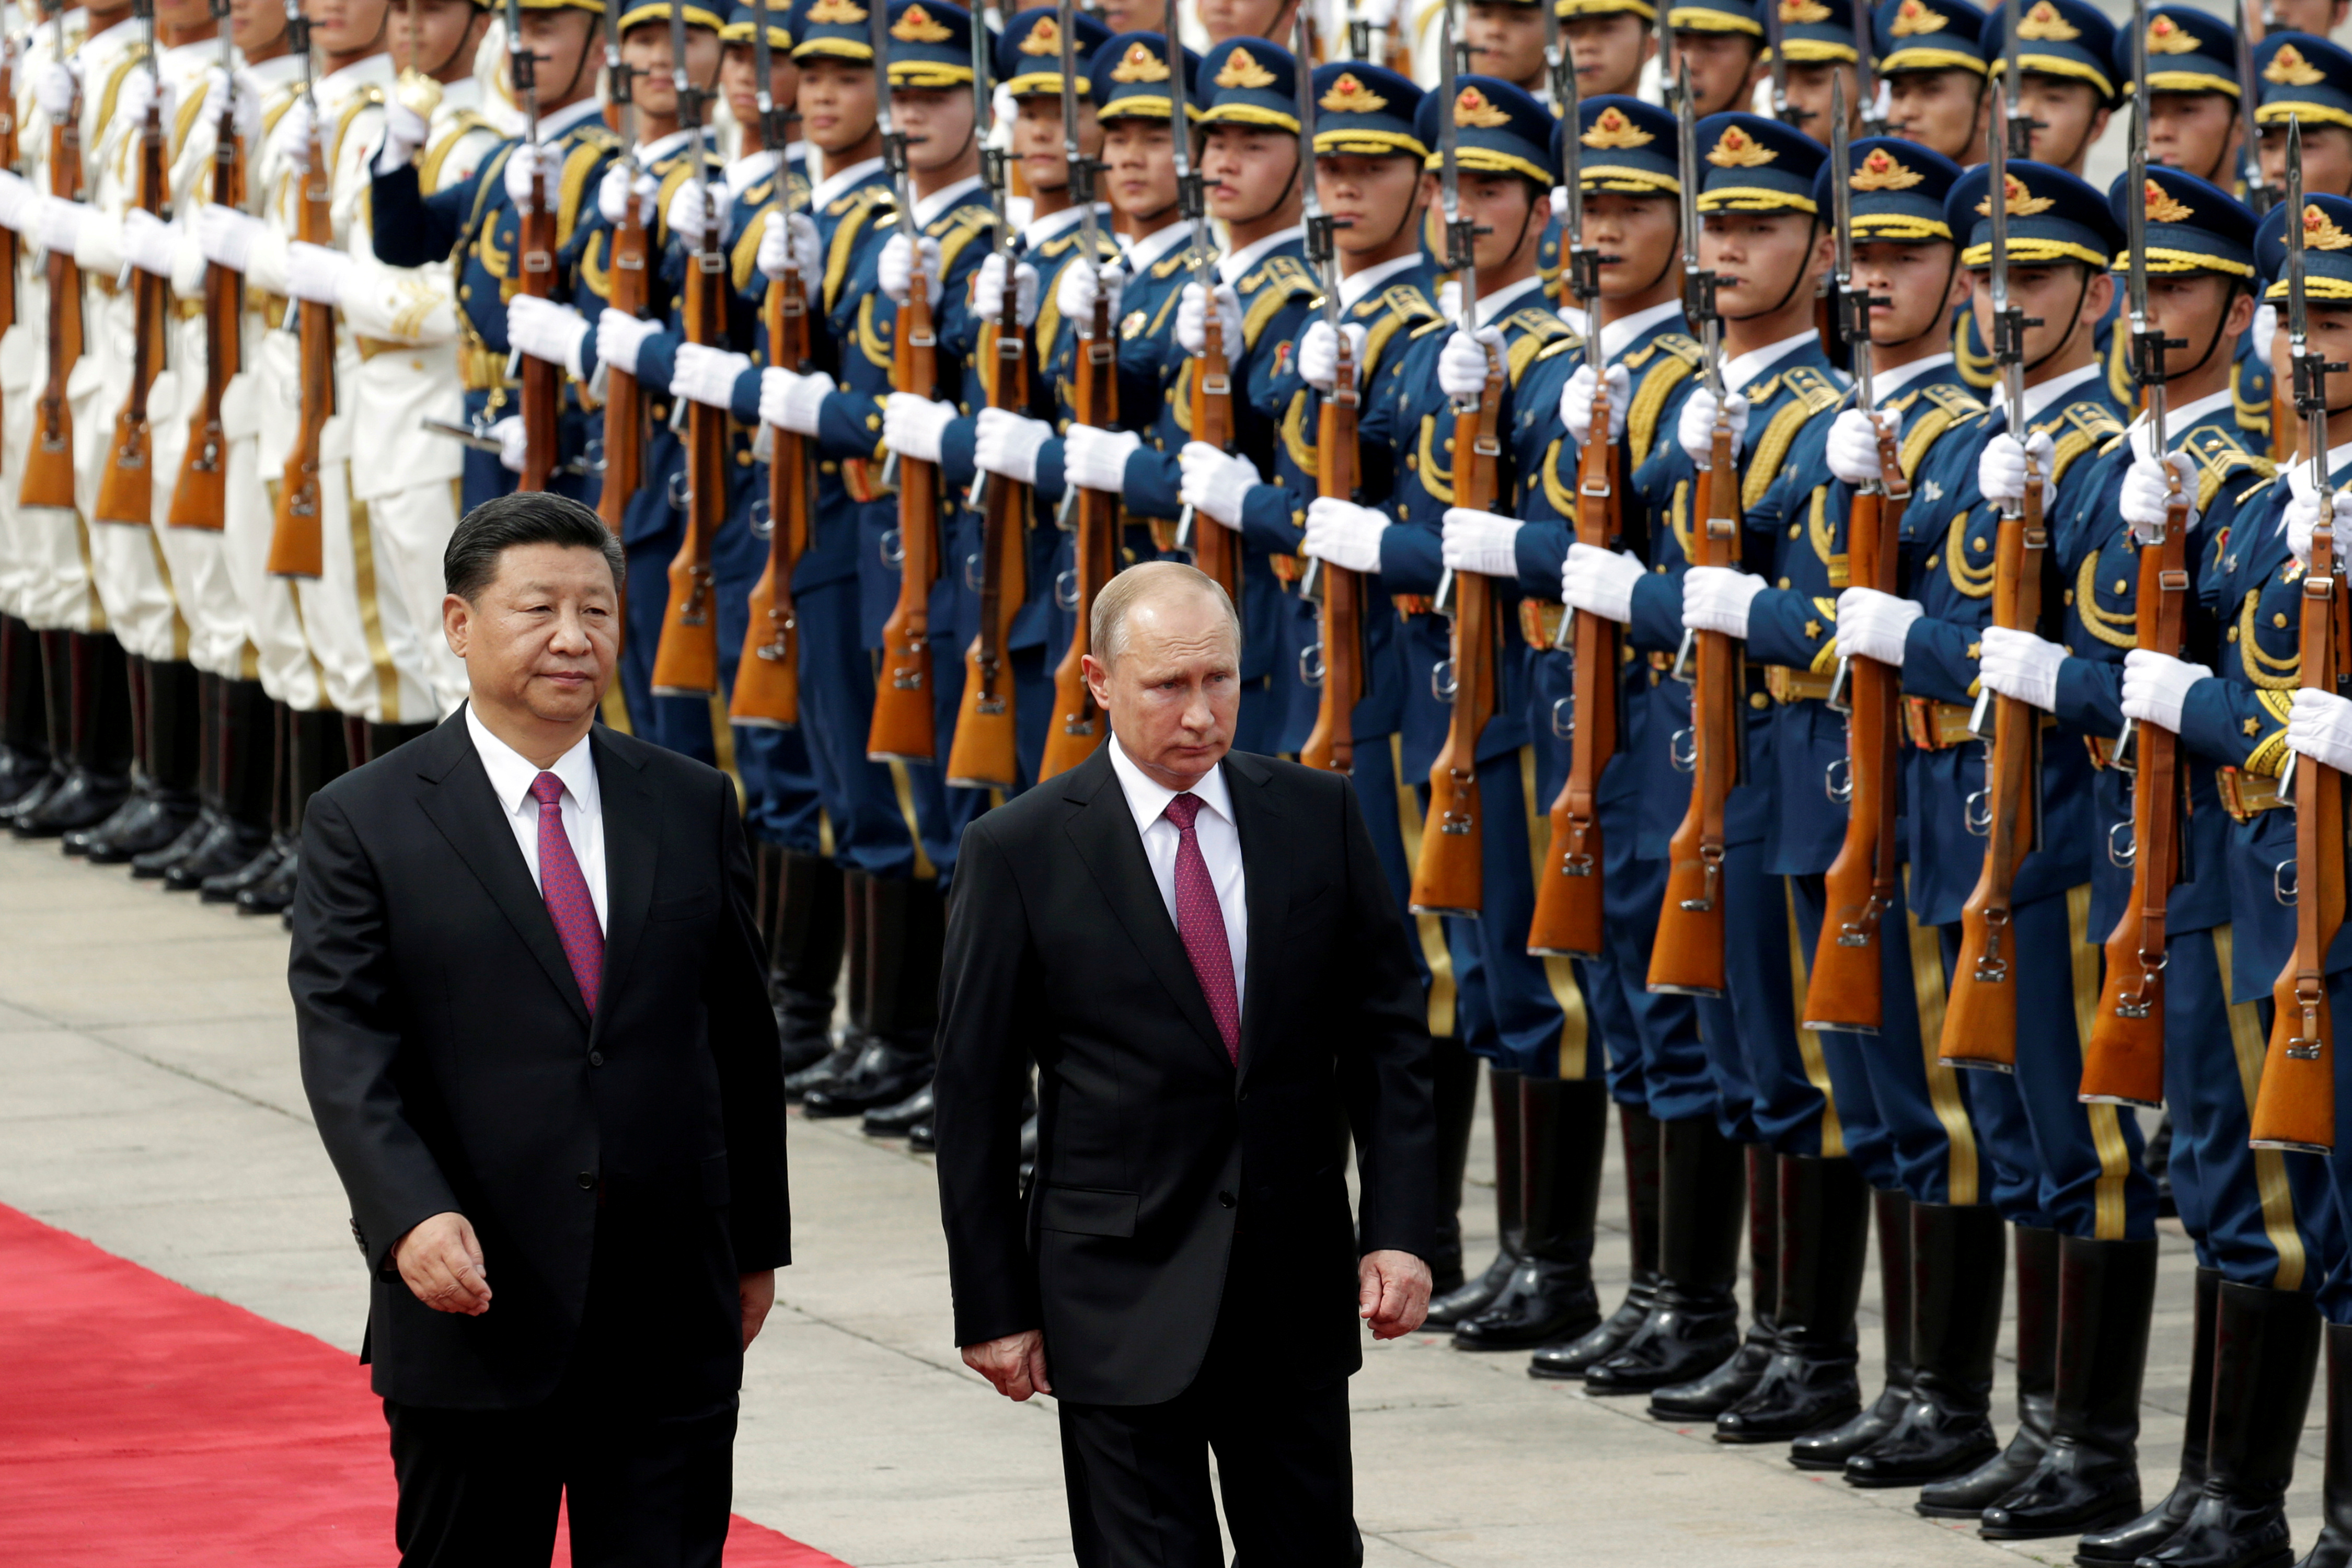 No, we aren't on the brink of a new Cold War with Russia and China